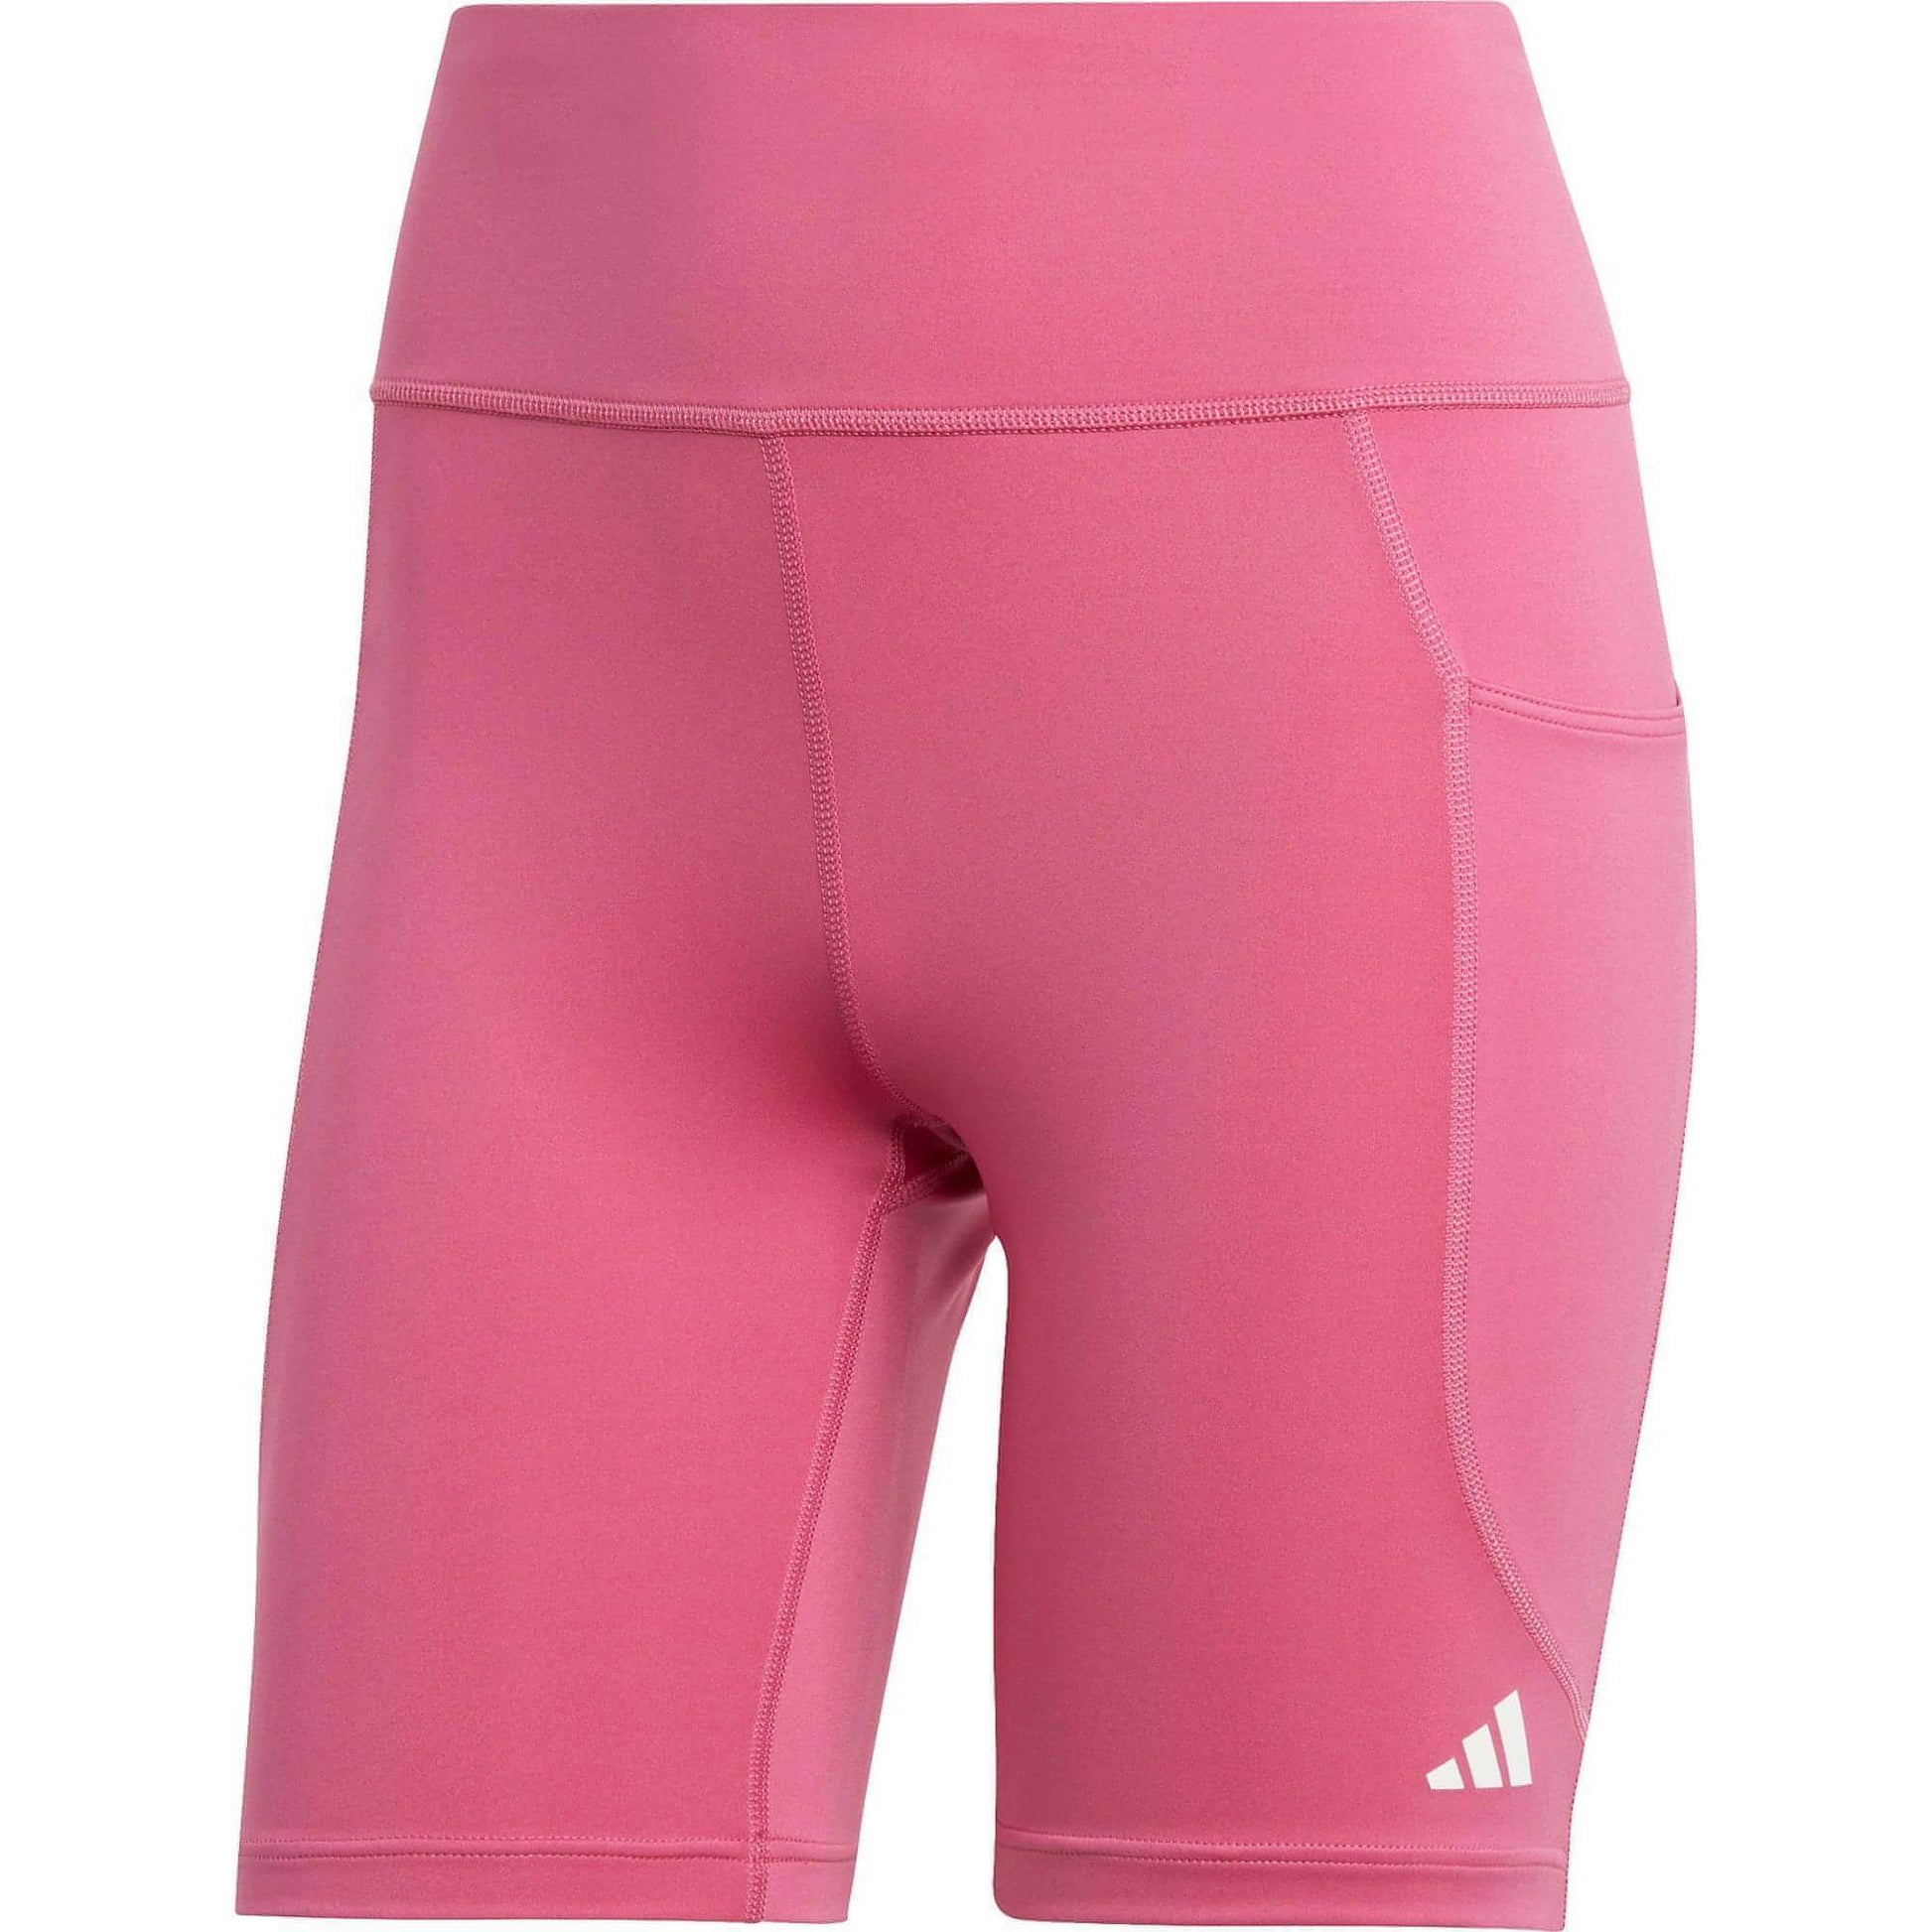 Adidas Dailyrun Inch Short Tights Hr5363 Front - Front View